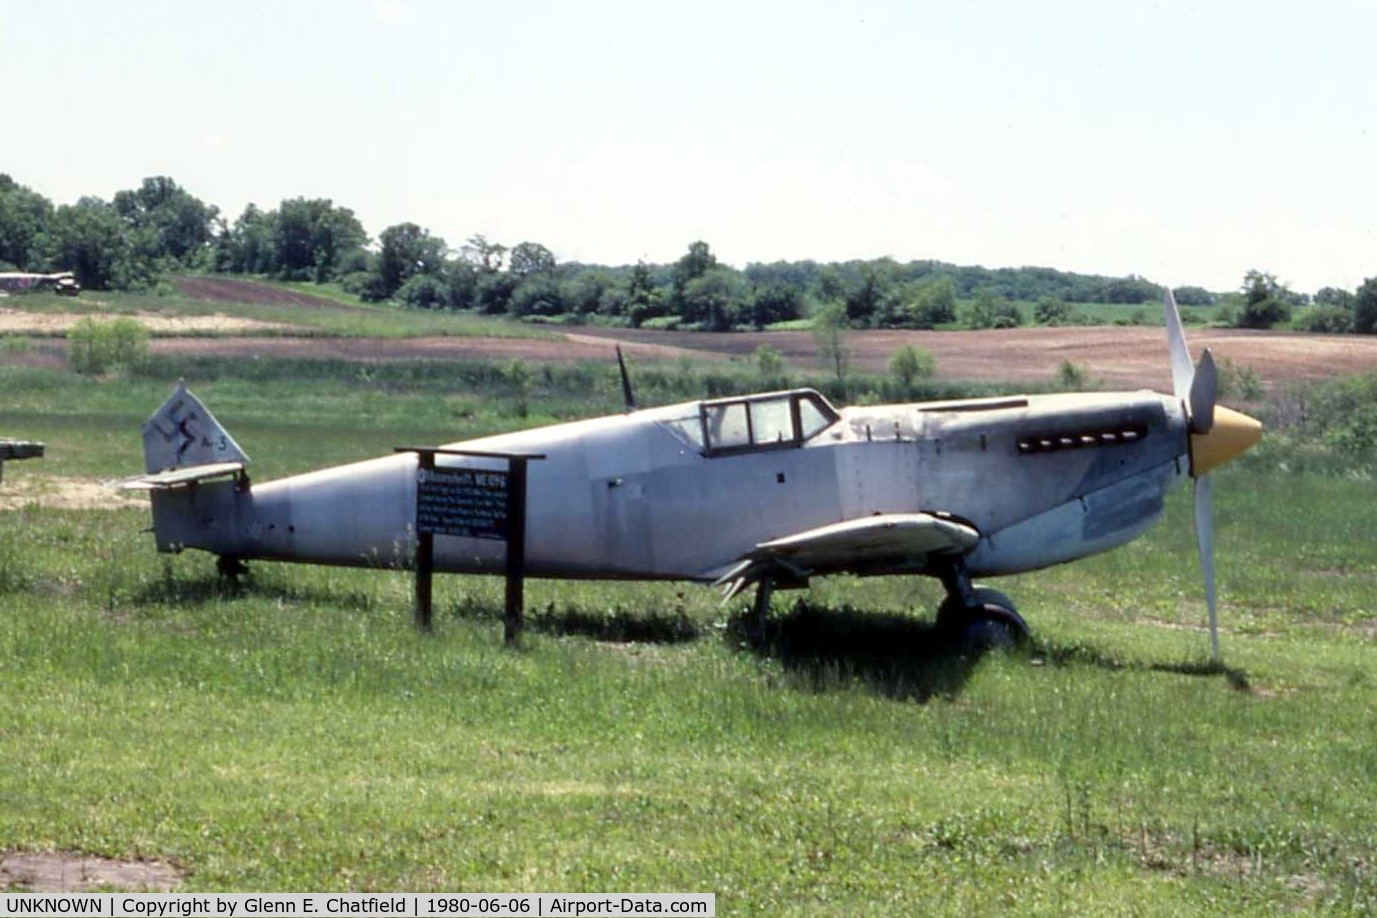 UNKNOWN, , Spanish-built Me.109 that was in the movie 